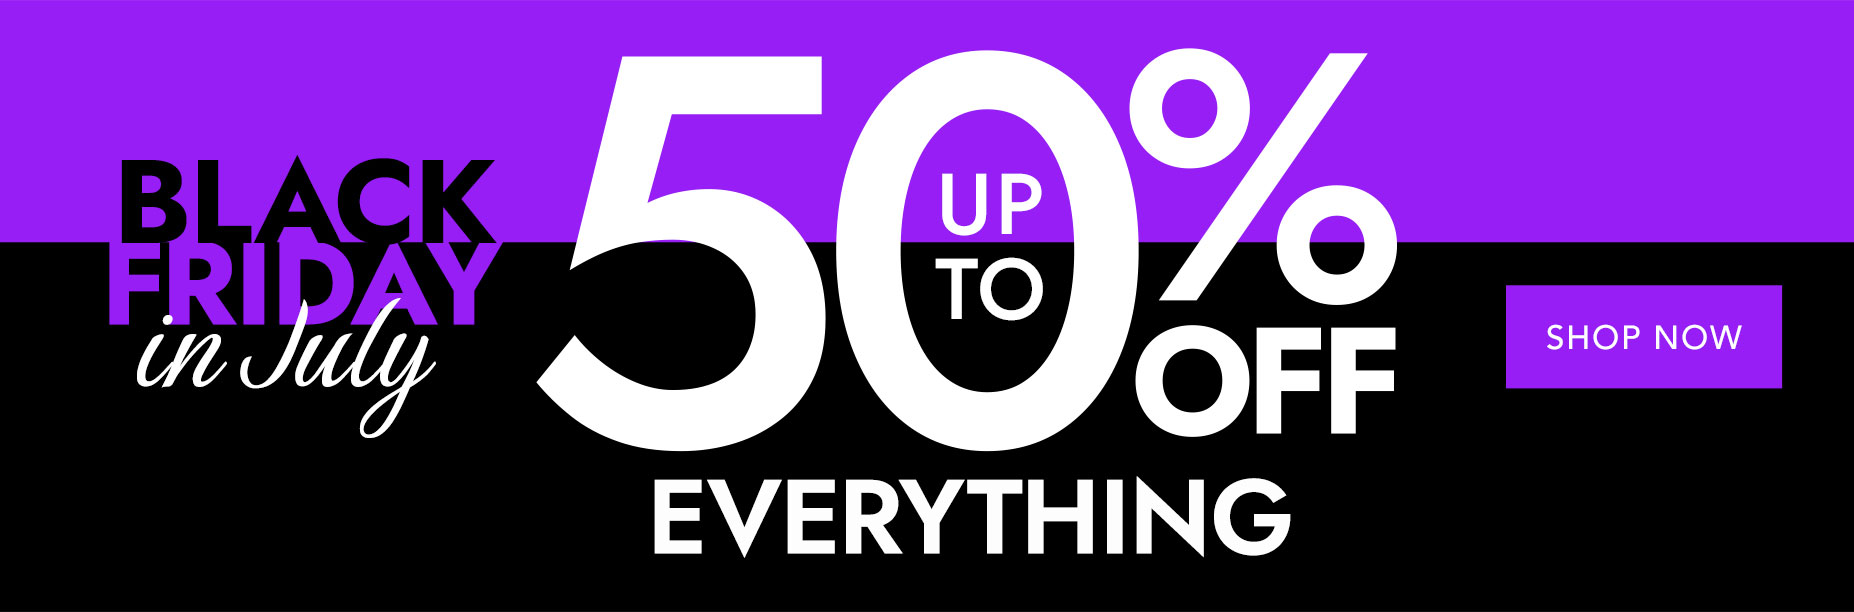 BLACK FRIDAY UP TO 50% EVERYTHING 